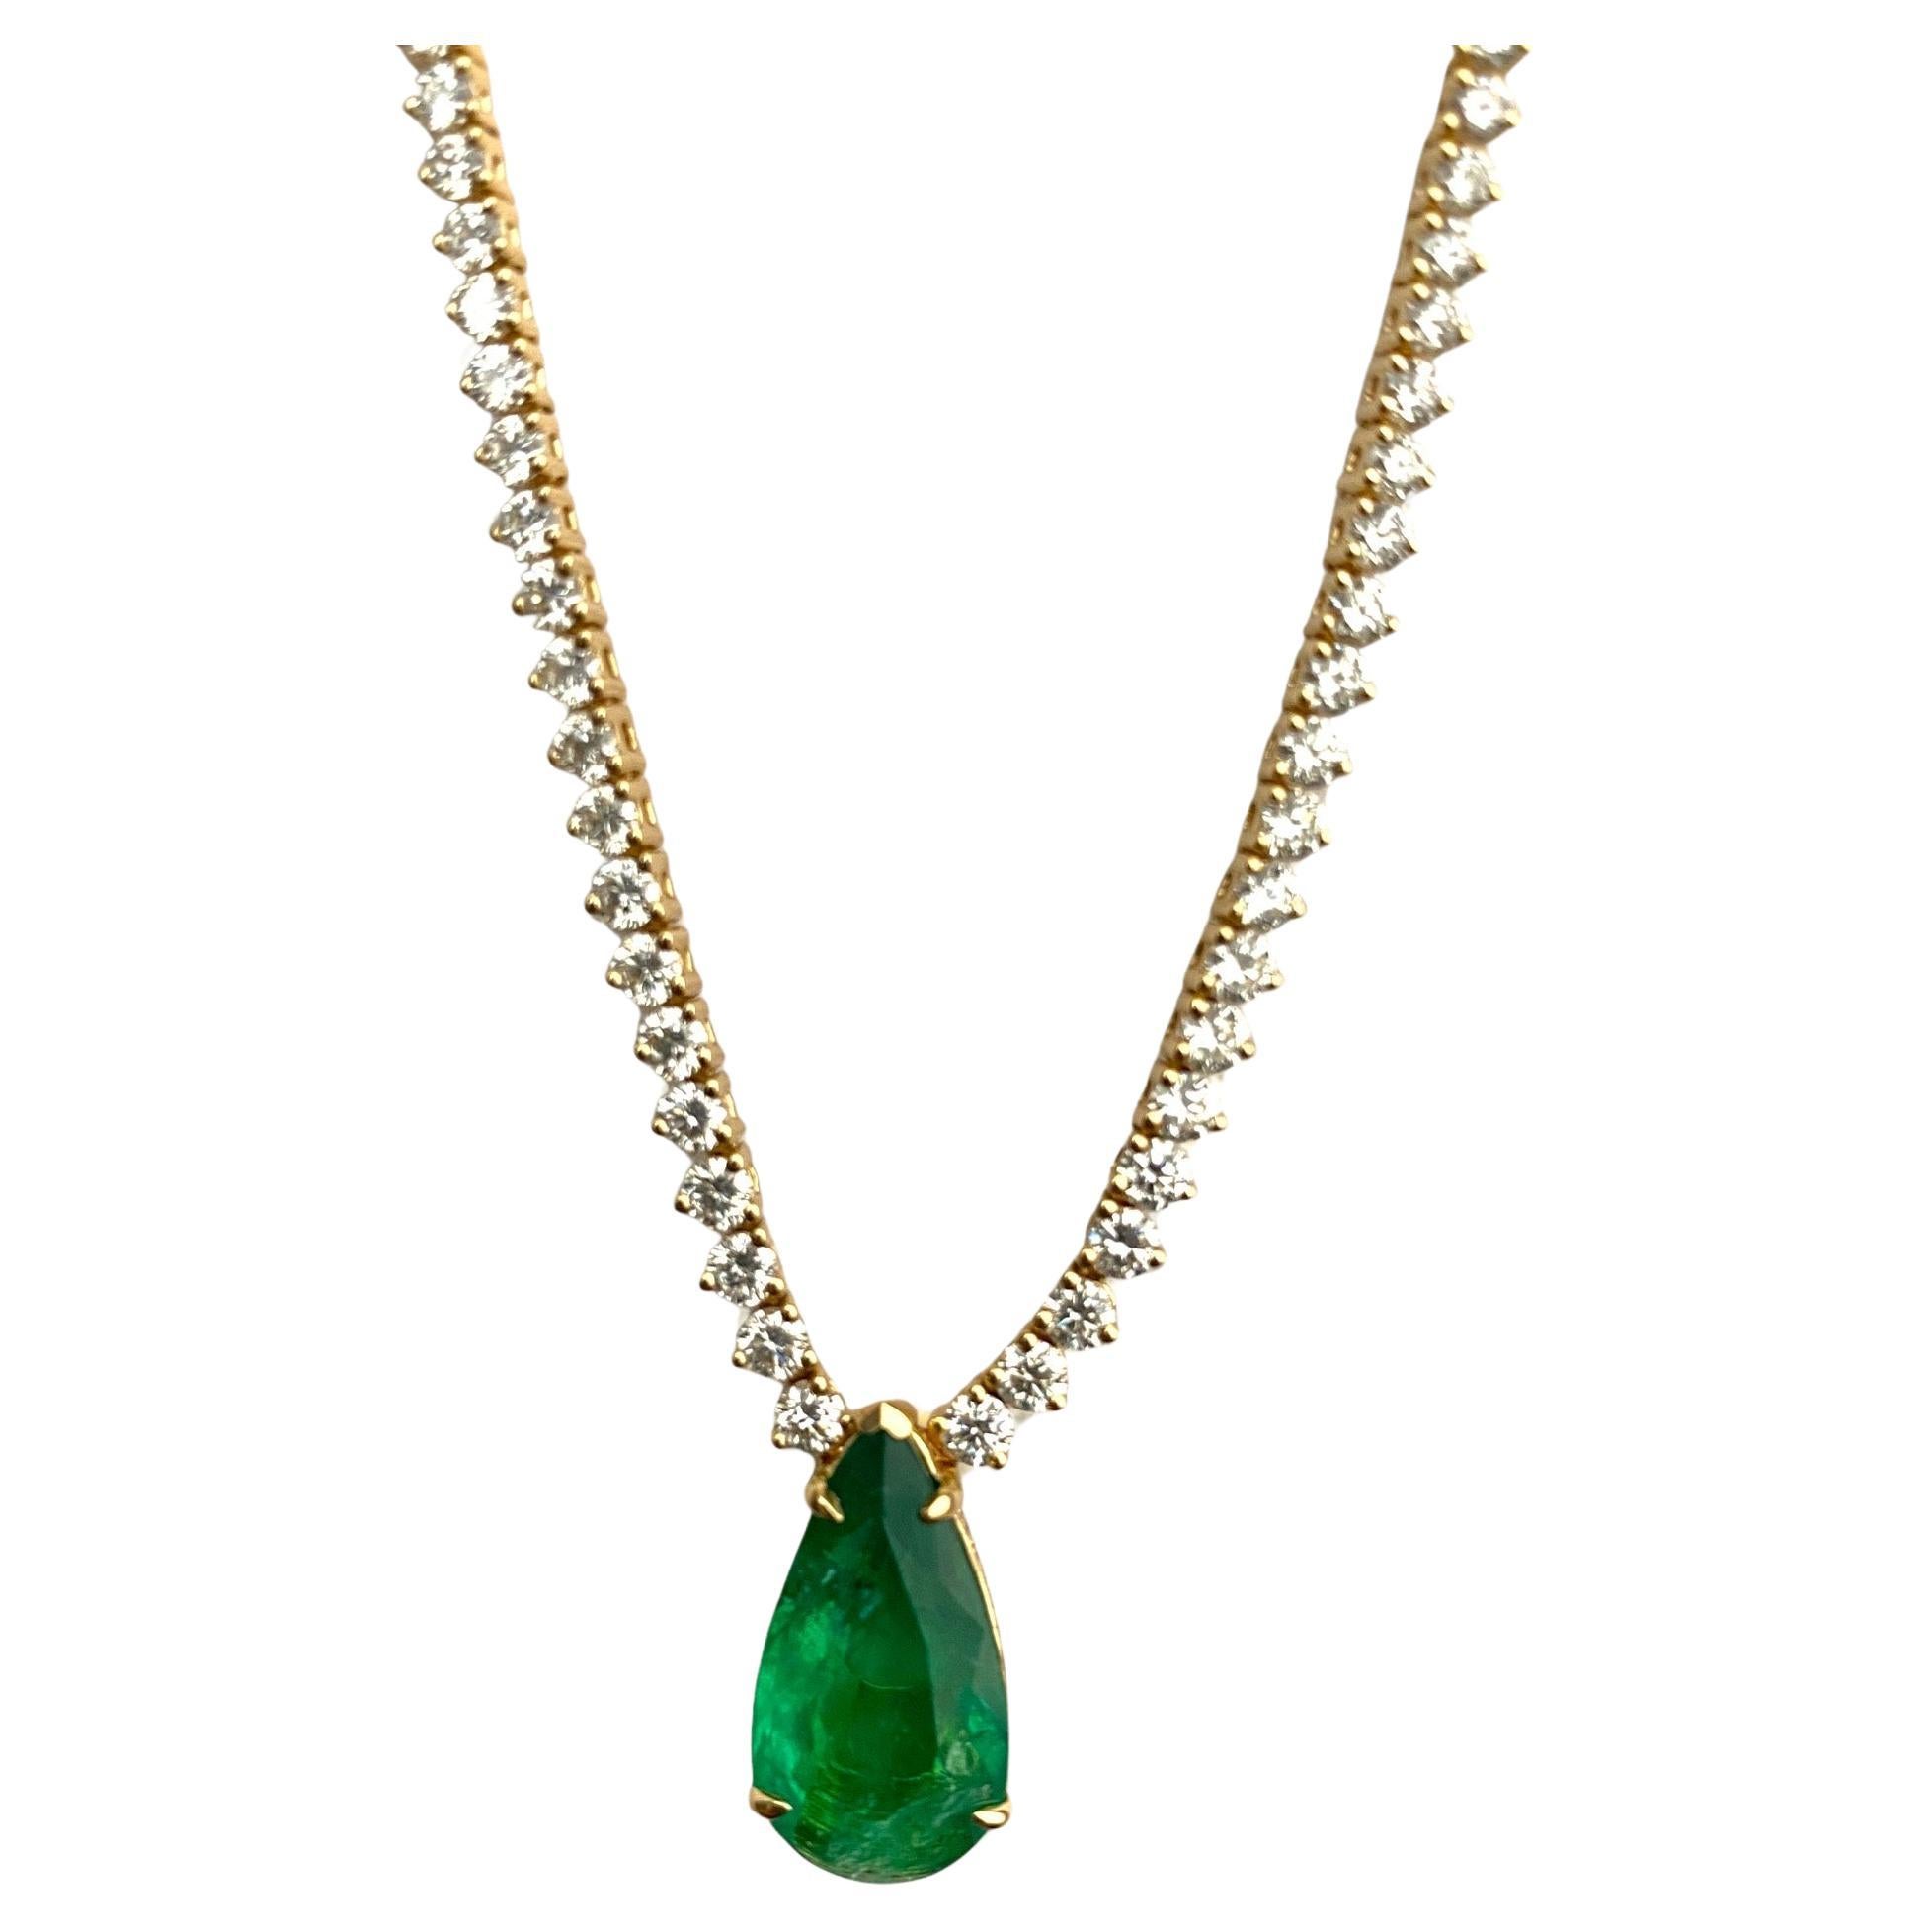 Statement 7.5 ct Emerald and Graduated Diamond Necklace